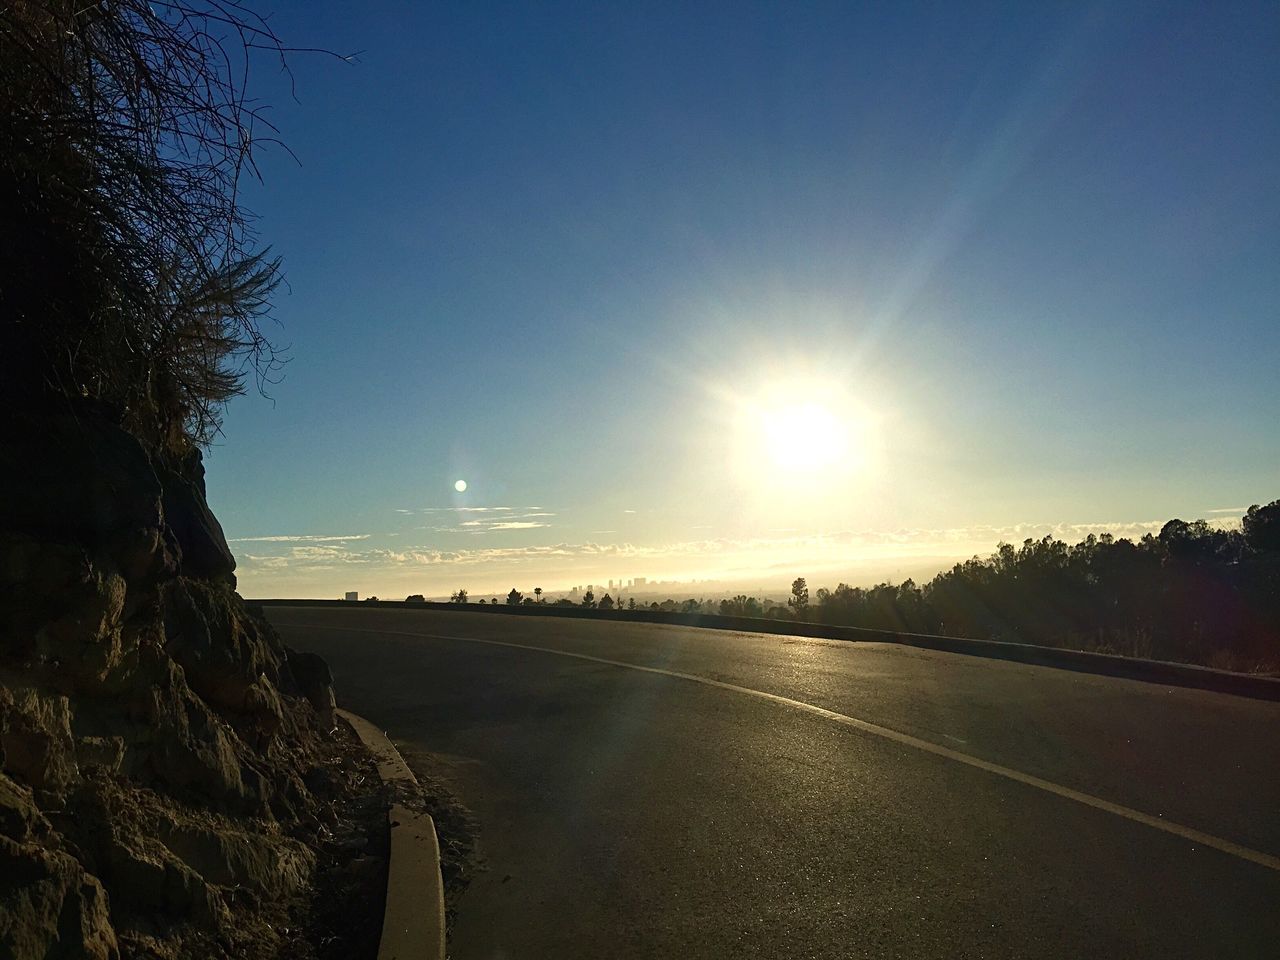 sun, sunlight, clear sky, tranquility, tranquil scene, road, sunbeam, scenics, lens flare, nature, beauty in nature, blue, the way forward, sky, landscape, copy space, transportation, tree, sunny, outdoors